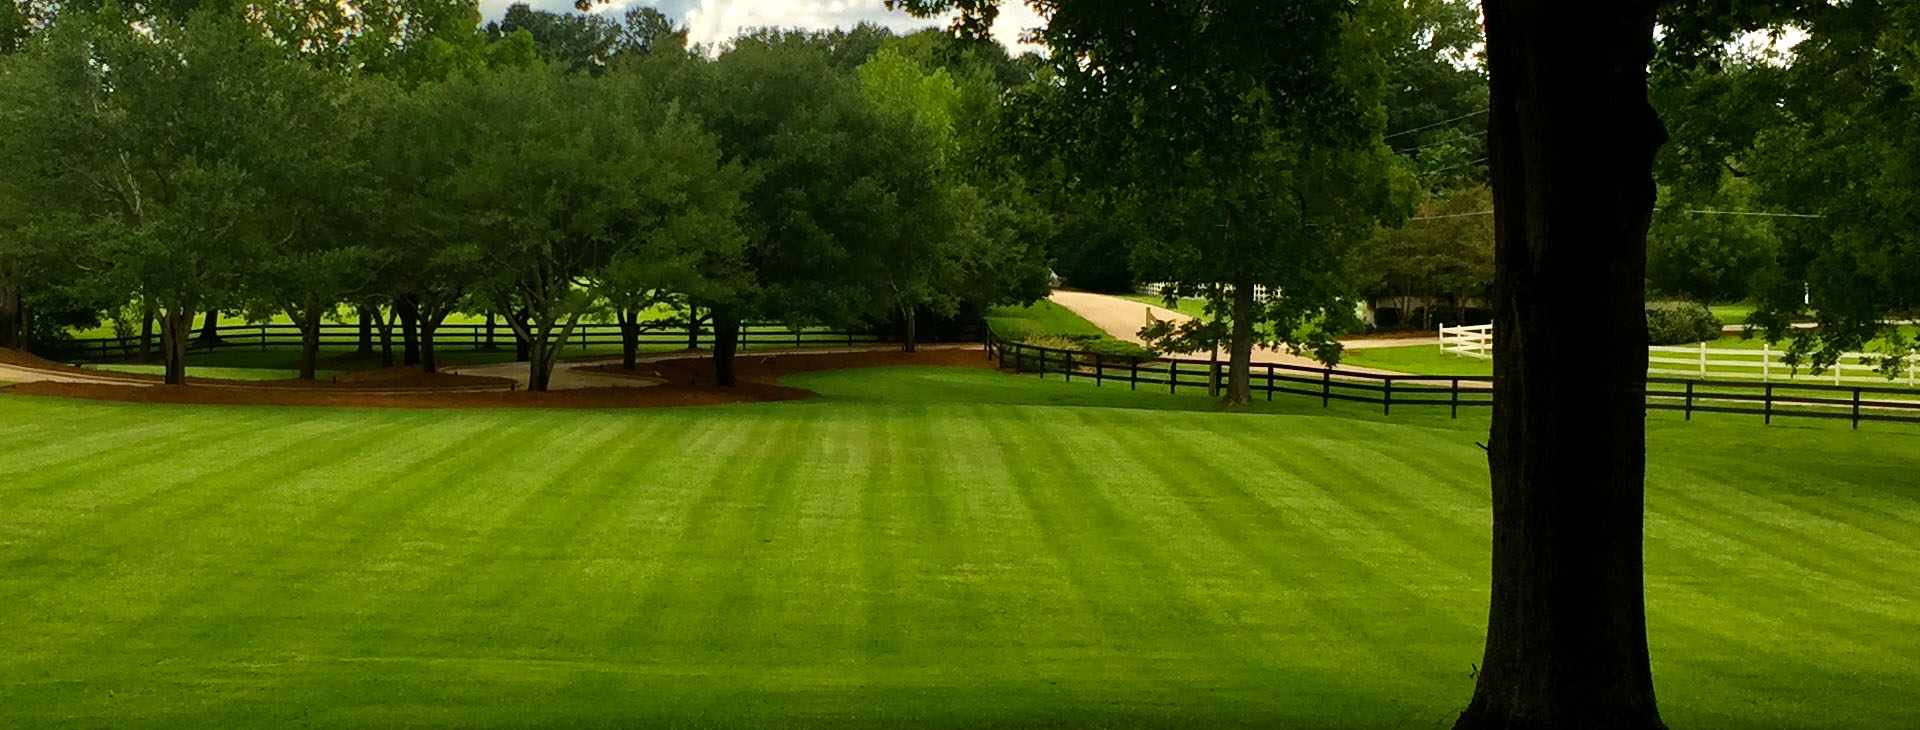 Trusted and proven. CMH Landscaping Will make sure you have an amazing-looking lawn.